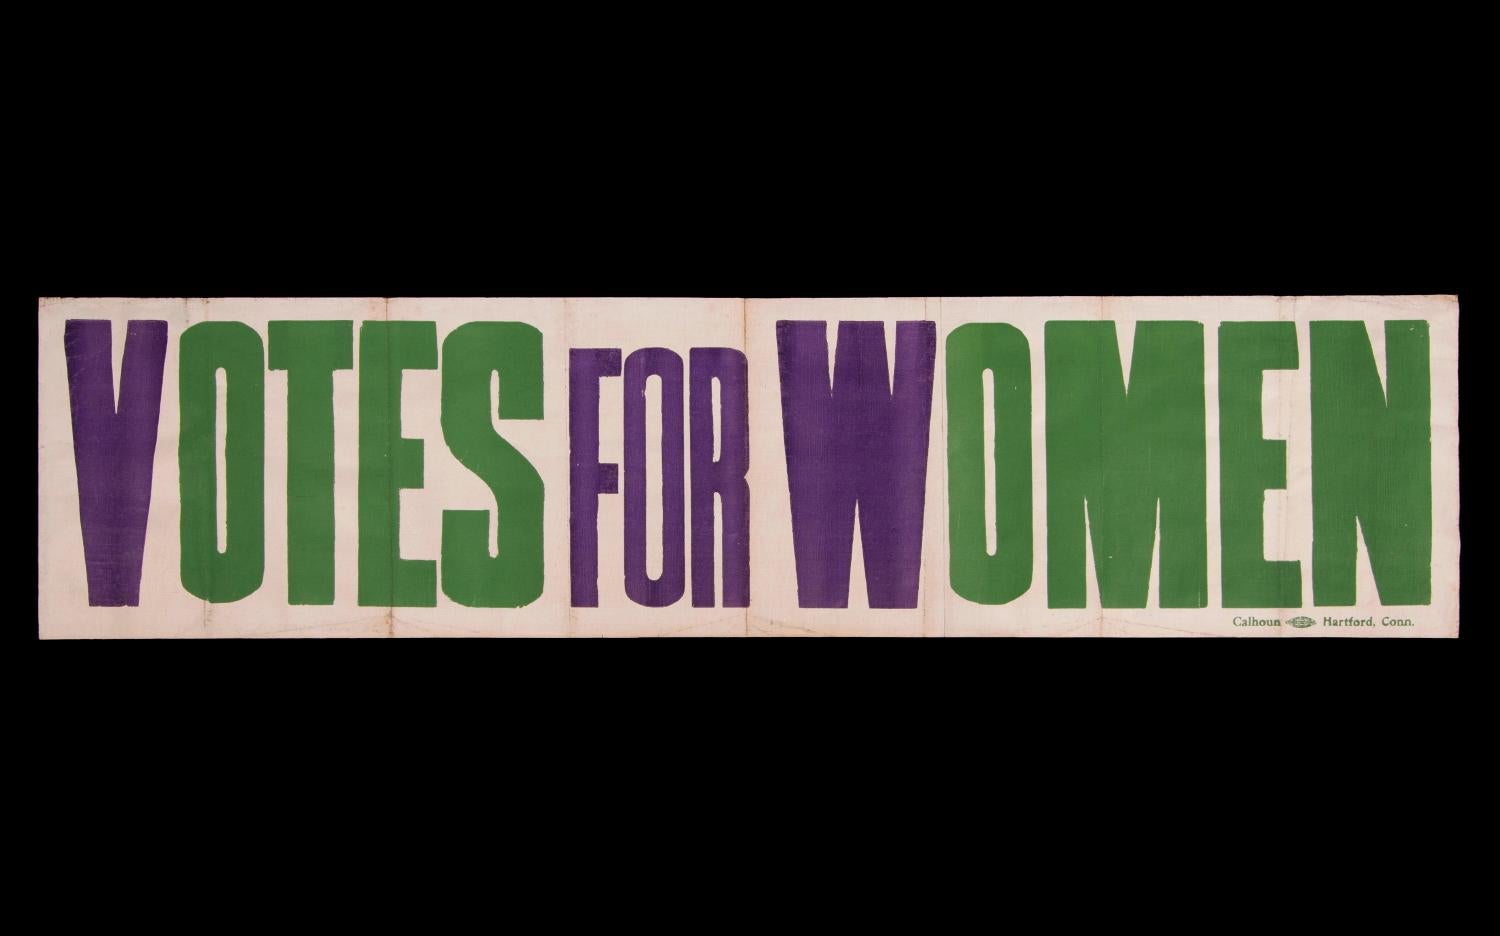 Early 20th Century Exceptional Large Votes for Women Banner in Violet & Green, Made in Hartford, CT